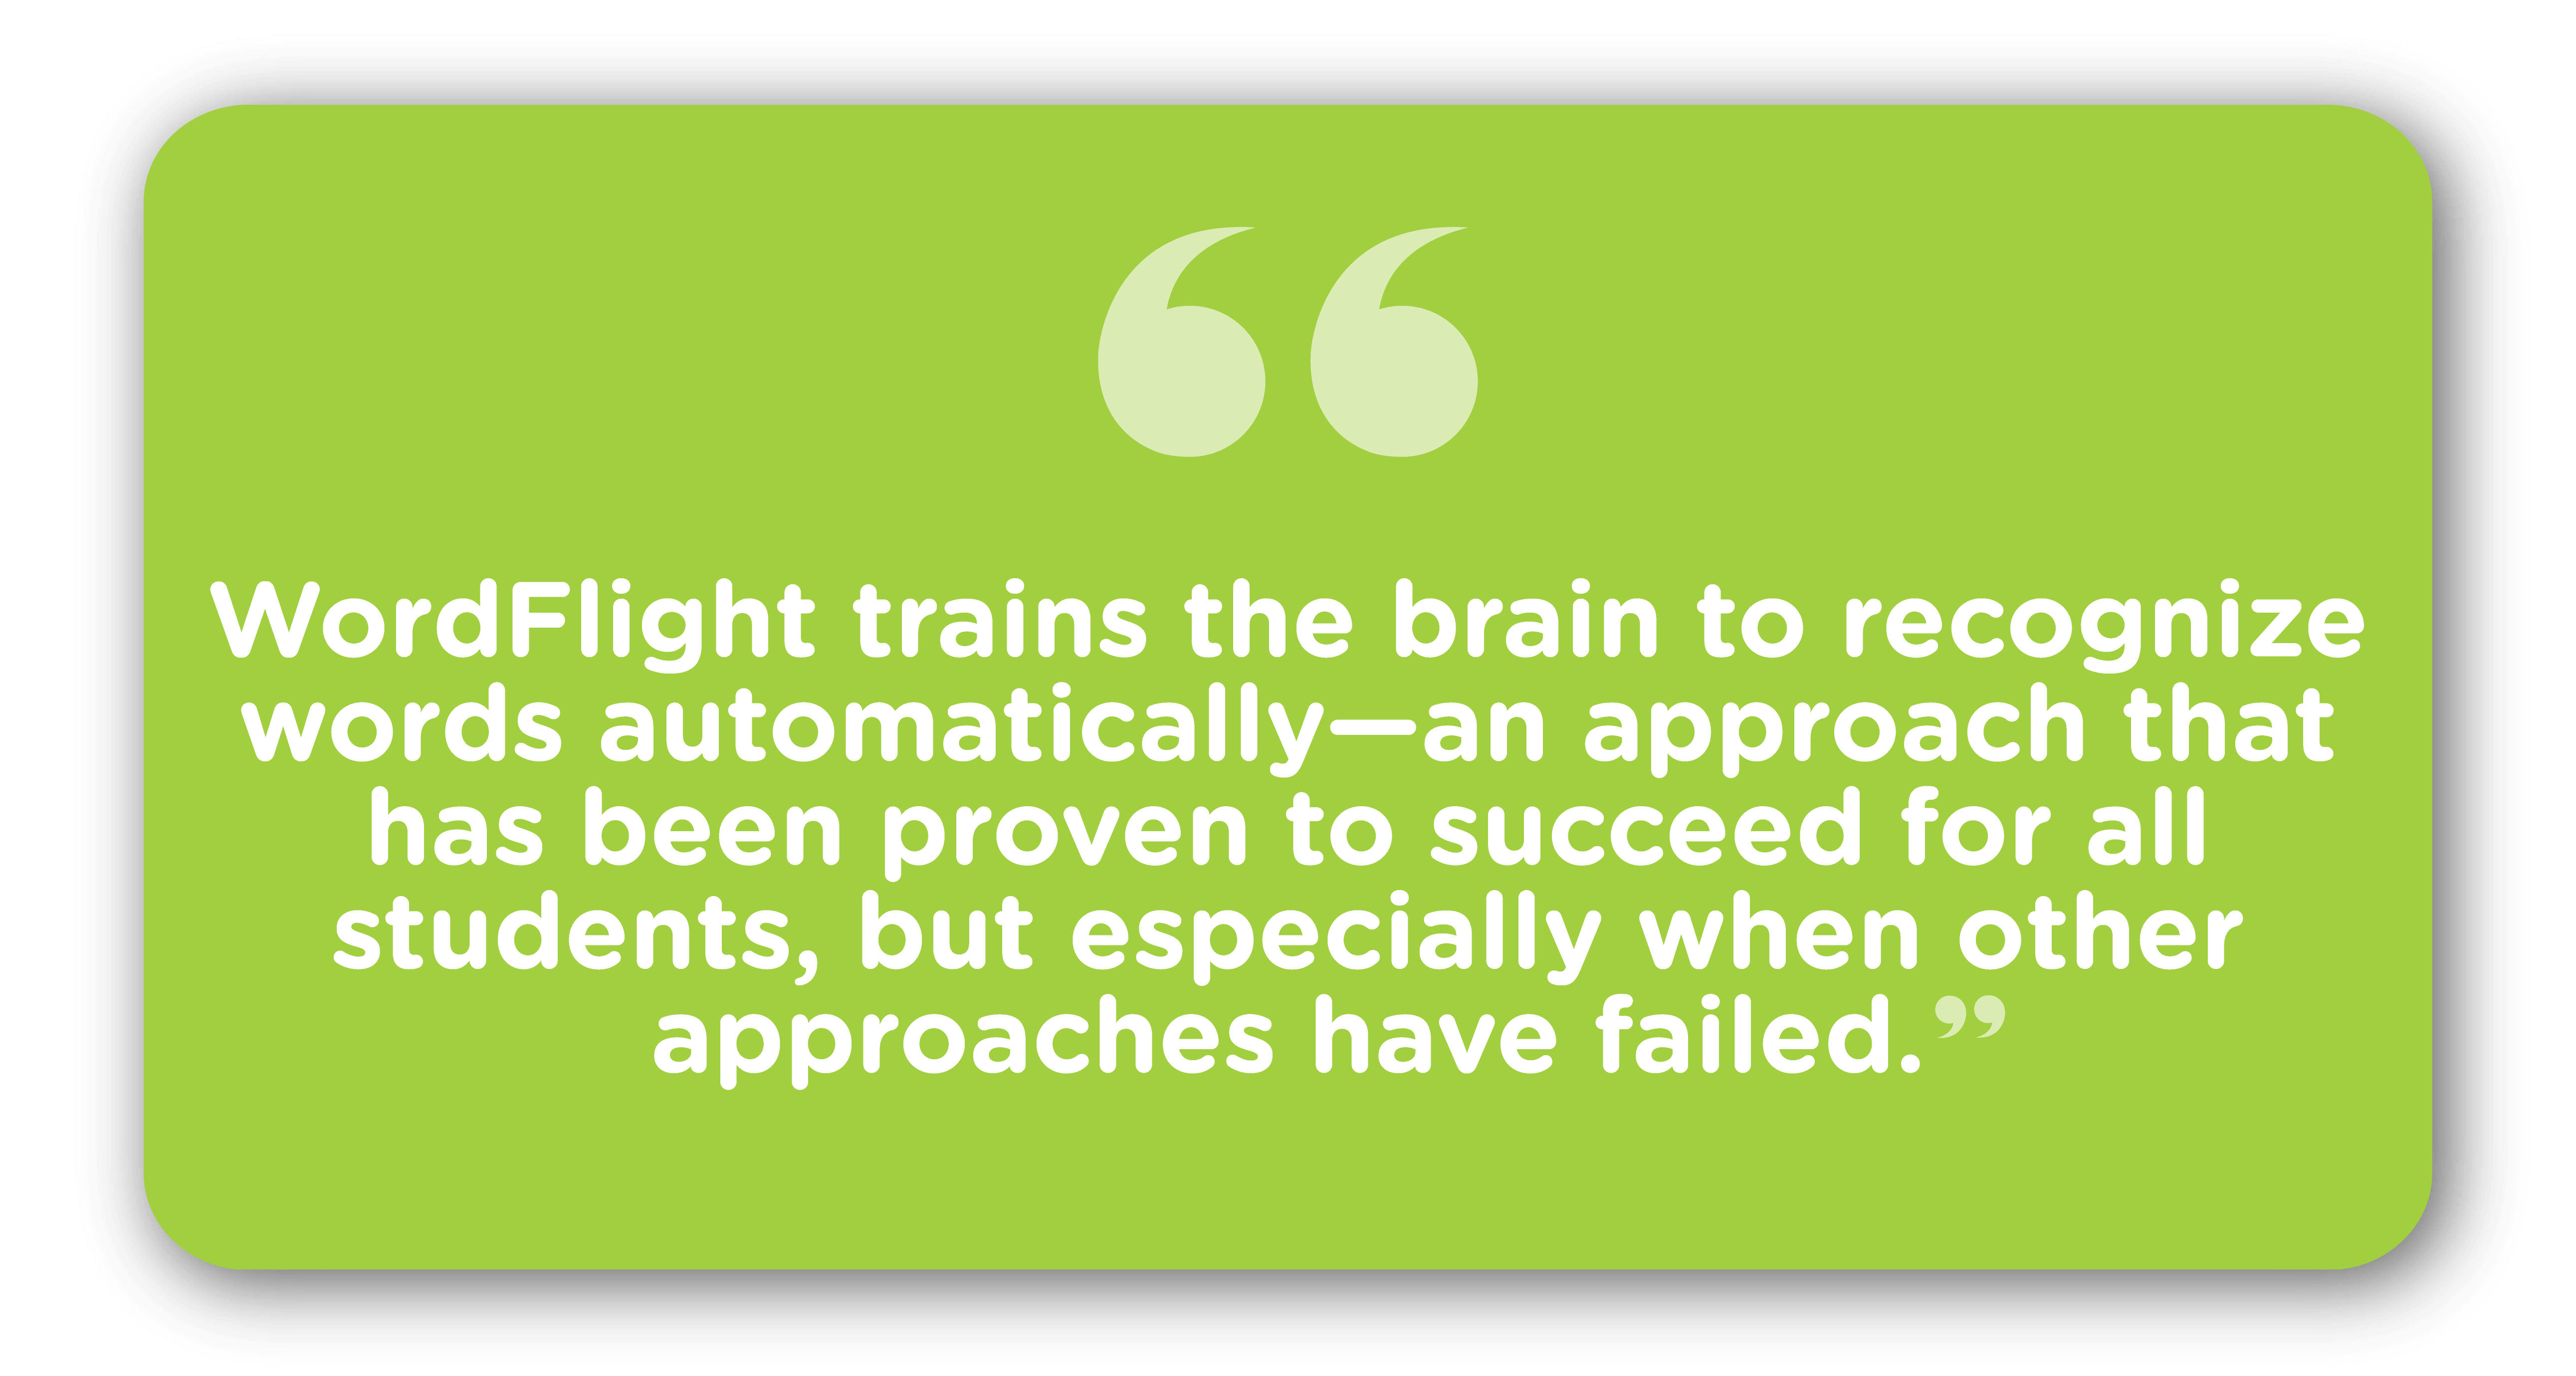 WordFlight trains the brain to recognize words automatically—an approach that has been proven to succeed for all students, but especially when other approaches have failed.